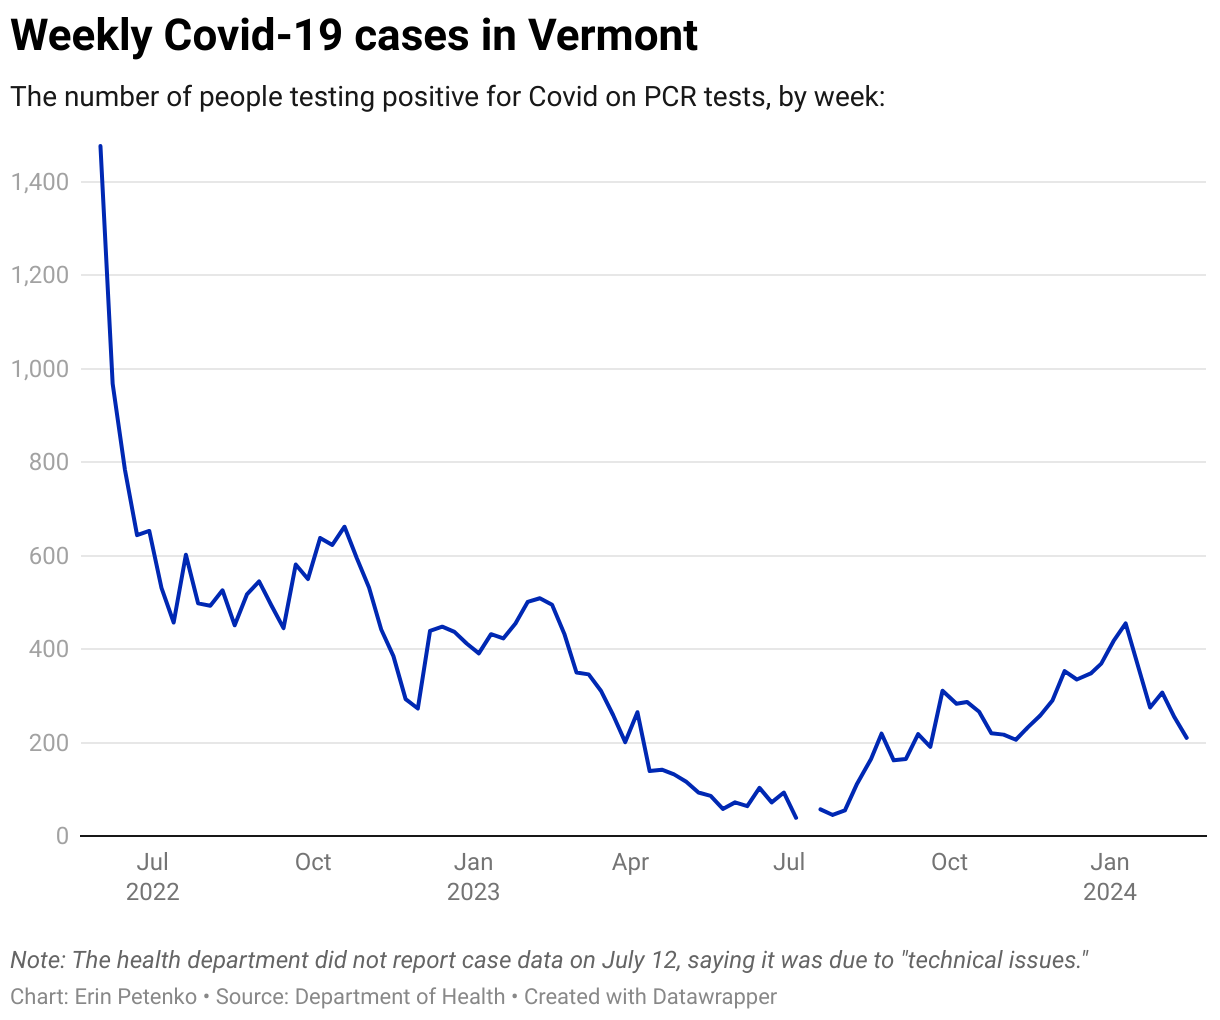 This chart depicts the number of weekly Covid cases in Vermont. For a screen reader friendly overview of Vermont Covid data, visit the VTDigger page https://vtdigger.org/coronavirus/